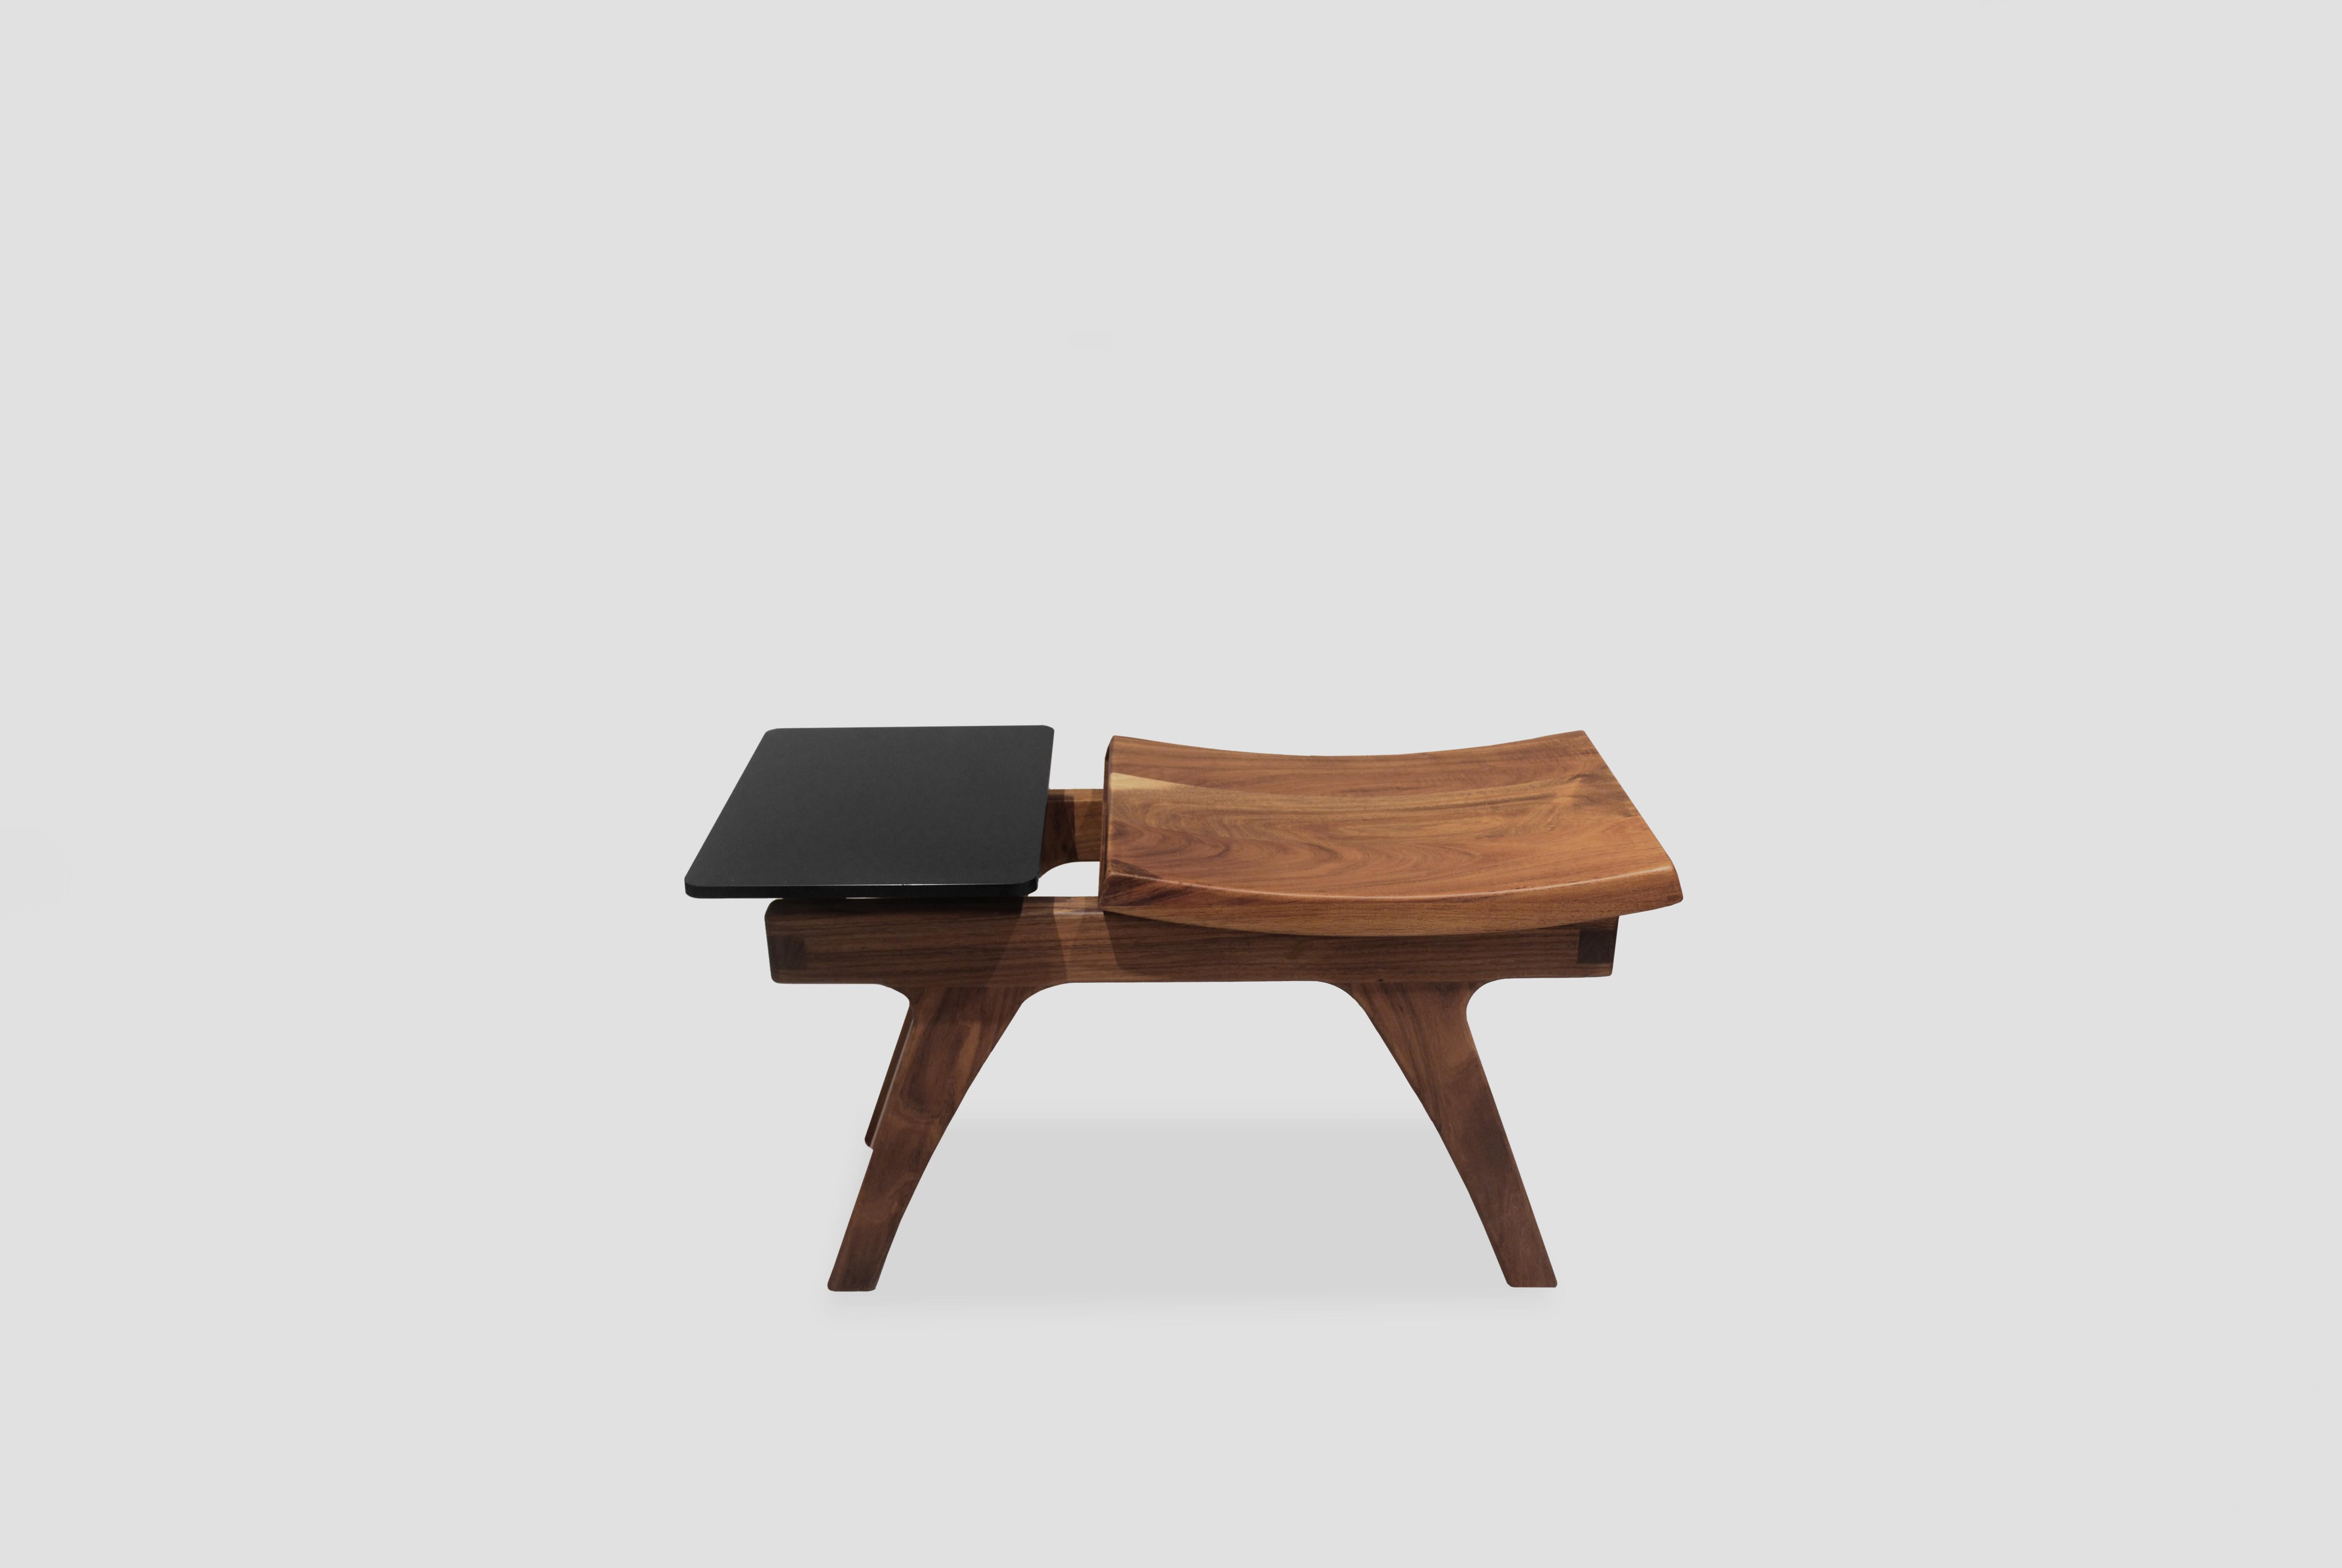 Tripot is a walnut stool designed by Arturo Verástegui for Breur Estudio. This piece is part of Diseño y Ebanistería, Breur Estudio first ever collection, in which they collaborated with top designers to achieve exceptional pieces.

Arturo